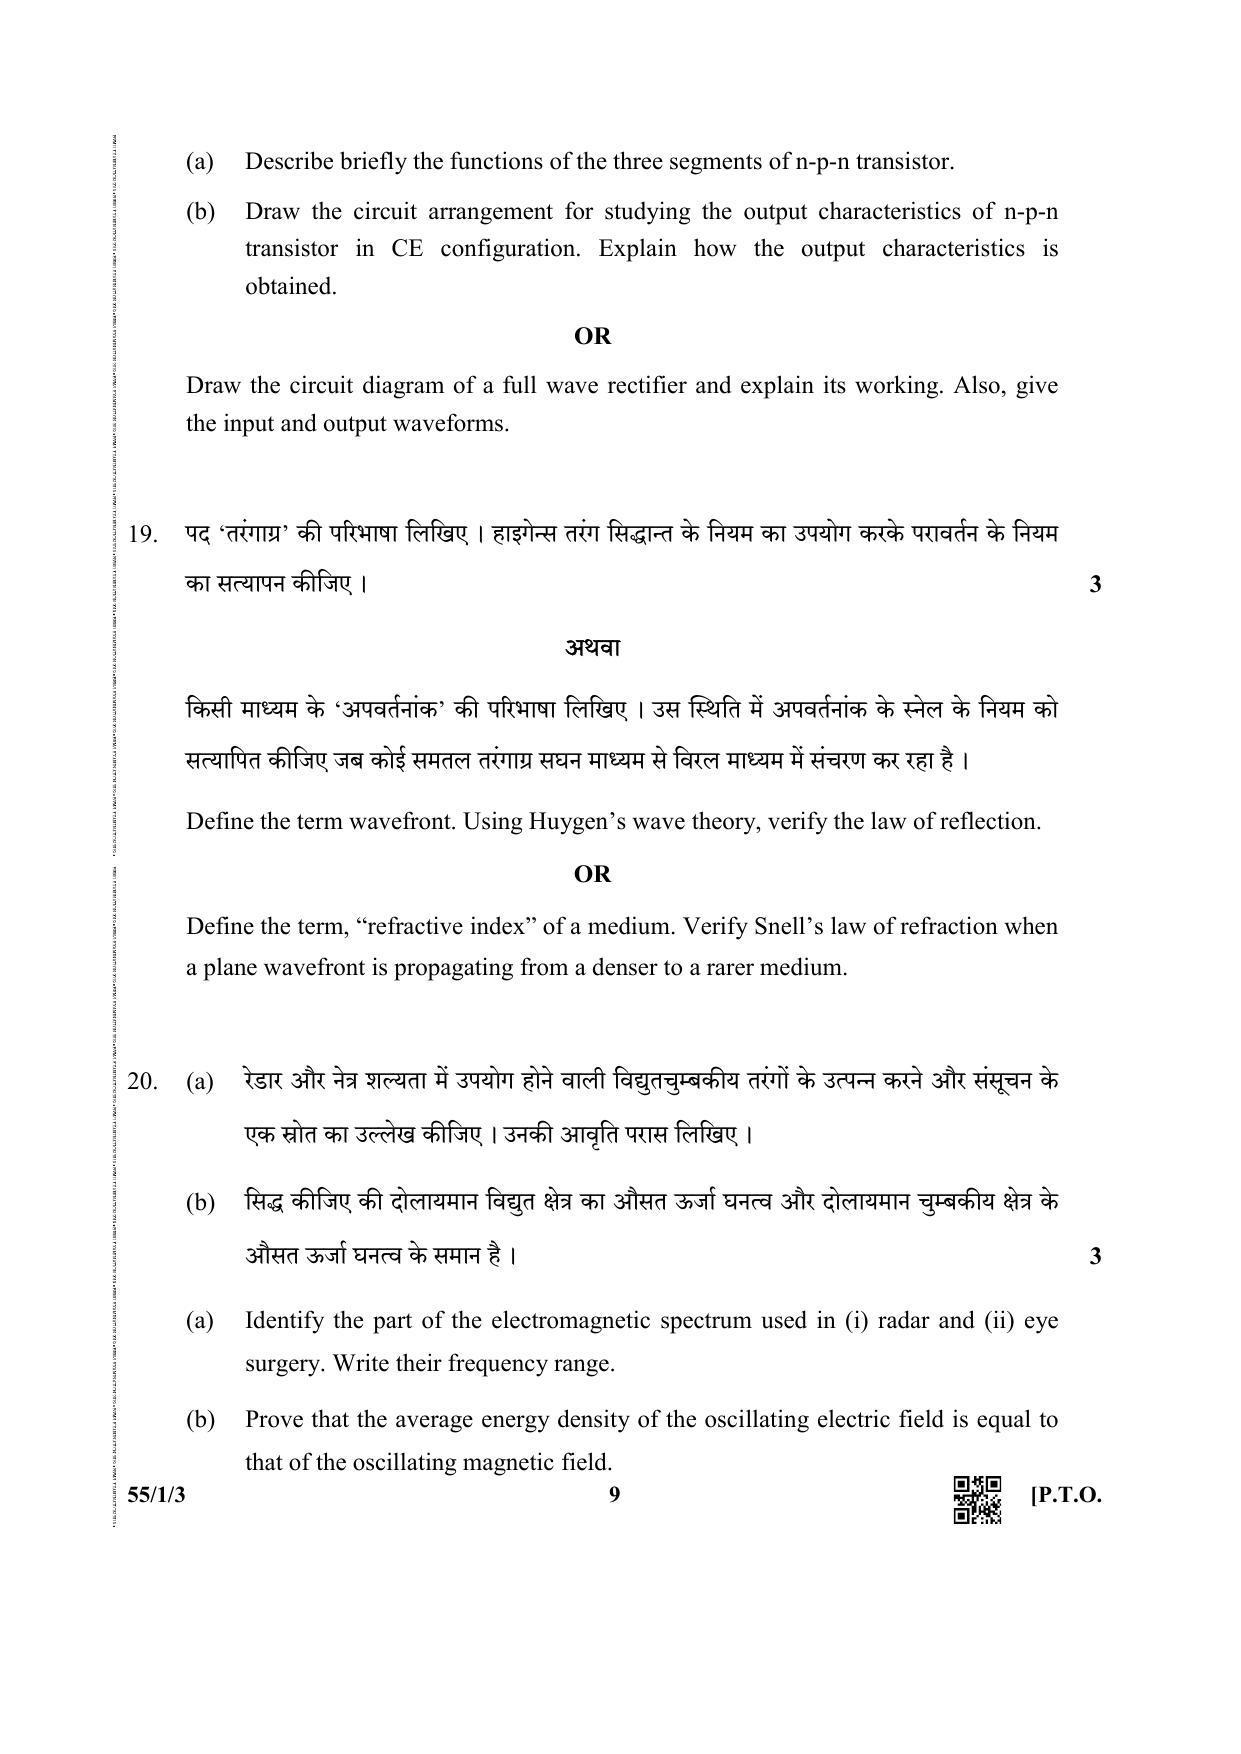 CBSE Class 12 55-1-3 (Physics) 2019 Question Paper - Page 9